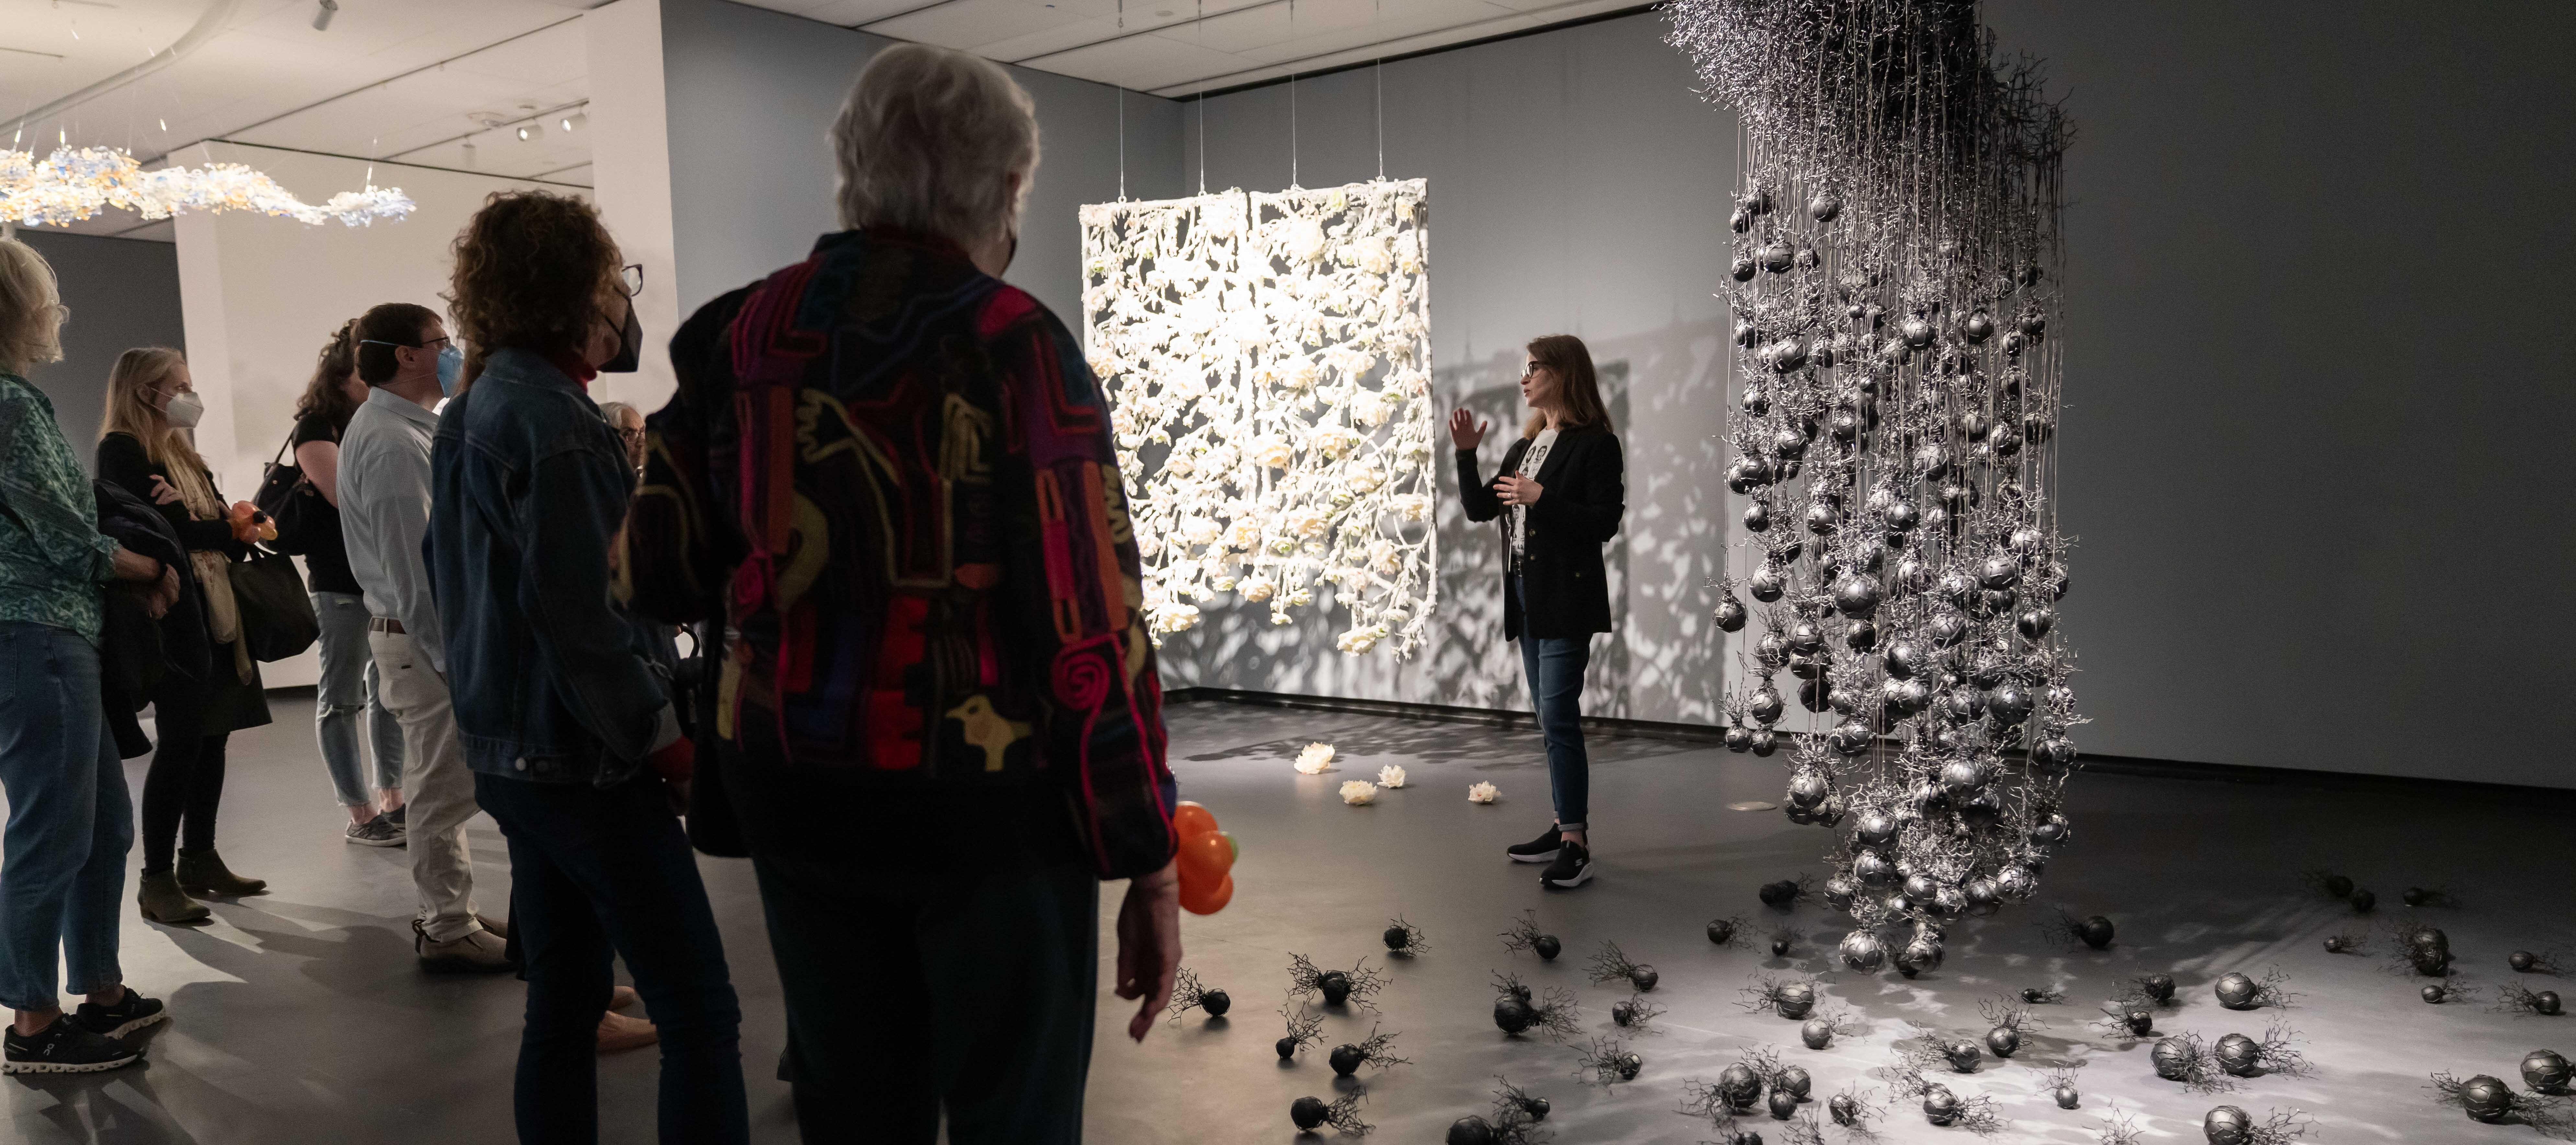 In a dimly-lit museum gallery, a light-skinned woman stands between two large abstract wax sculptures that hang from the ceiling. One is a a white intricate rectangle of connected flowers and vines; the other is a black cluster of fine, vein-like threads and hanging spheres. Below each sculpture, are more of their elements are arranged on the ground. The woman faces a group of visitors who look on.